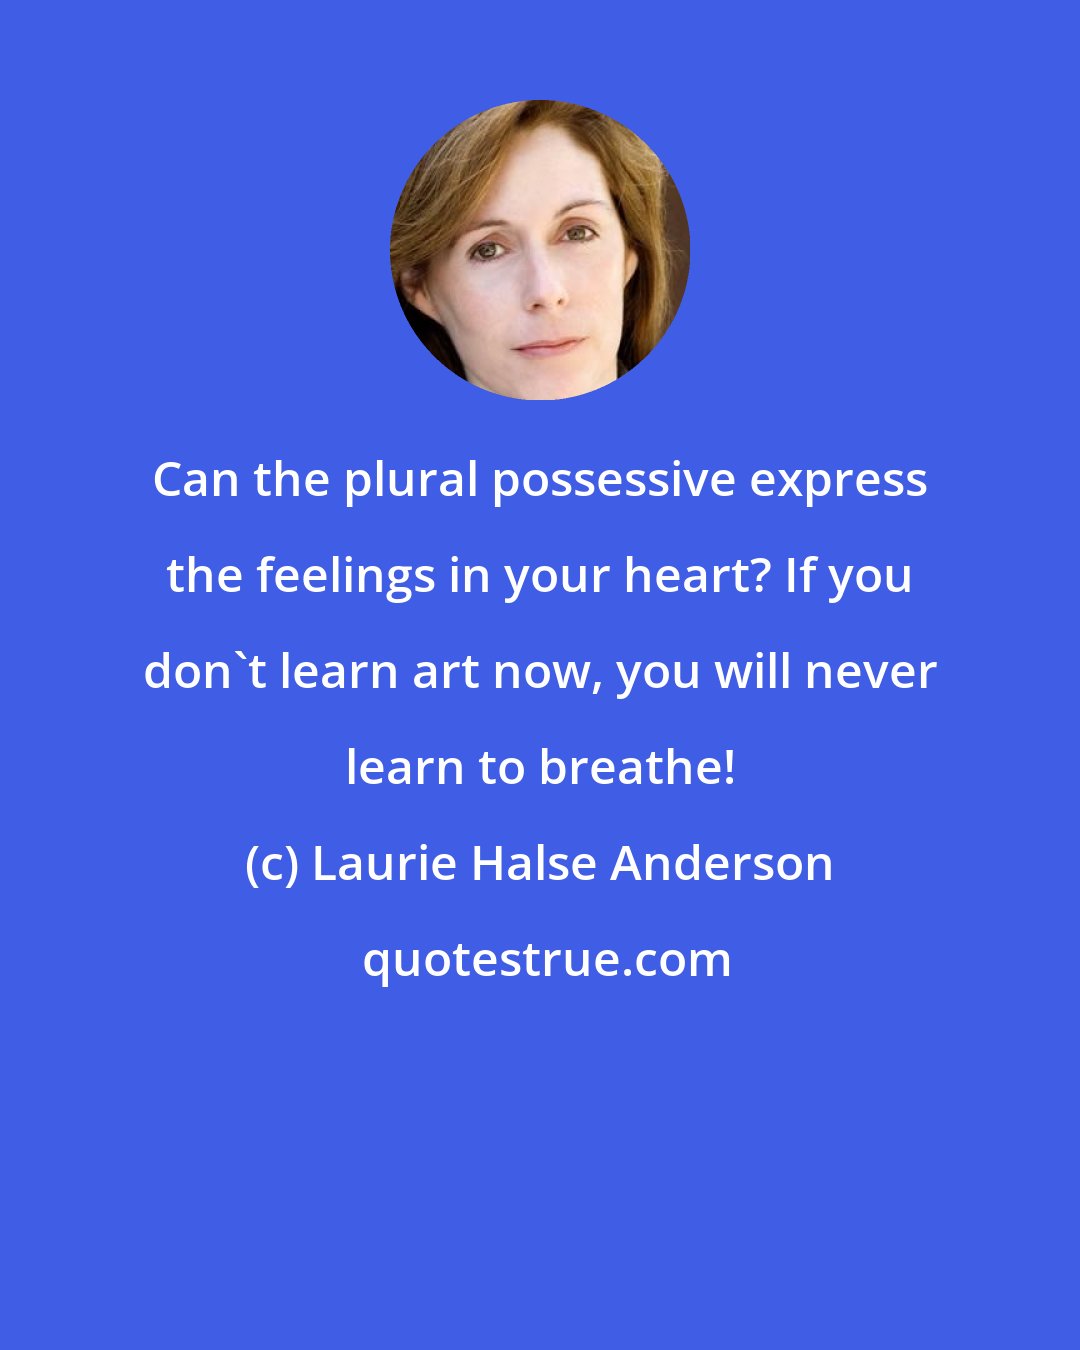 Laurie Halse Anderson: Can the plural possessive express the feelings in your heart? If you don't learn art now, you will never learn to breathe!